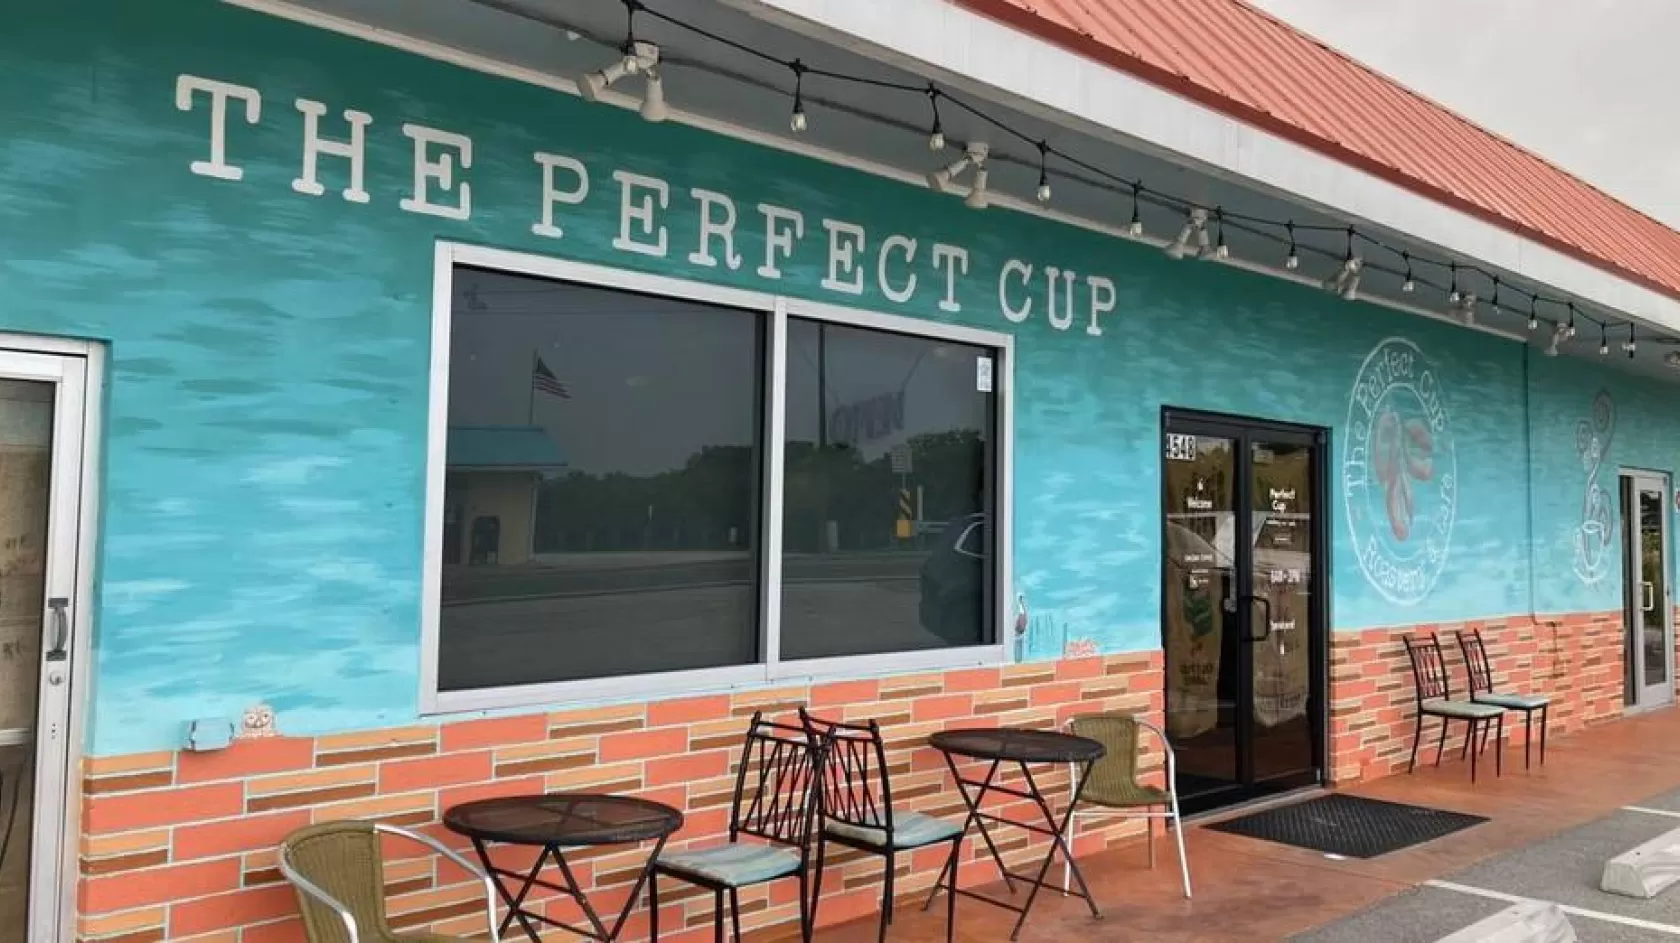 The exterior of the Perfect Cup cafe in Matlacha